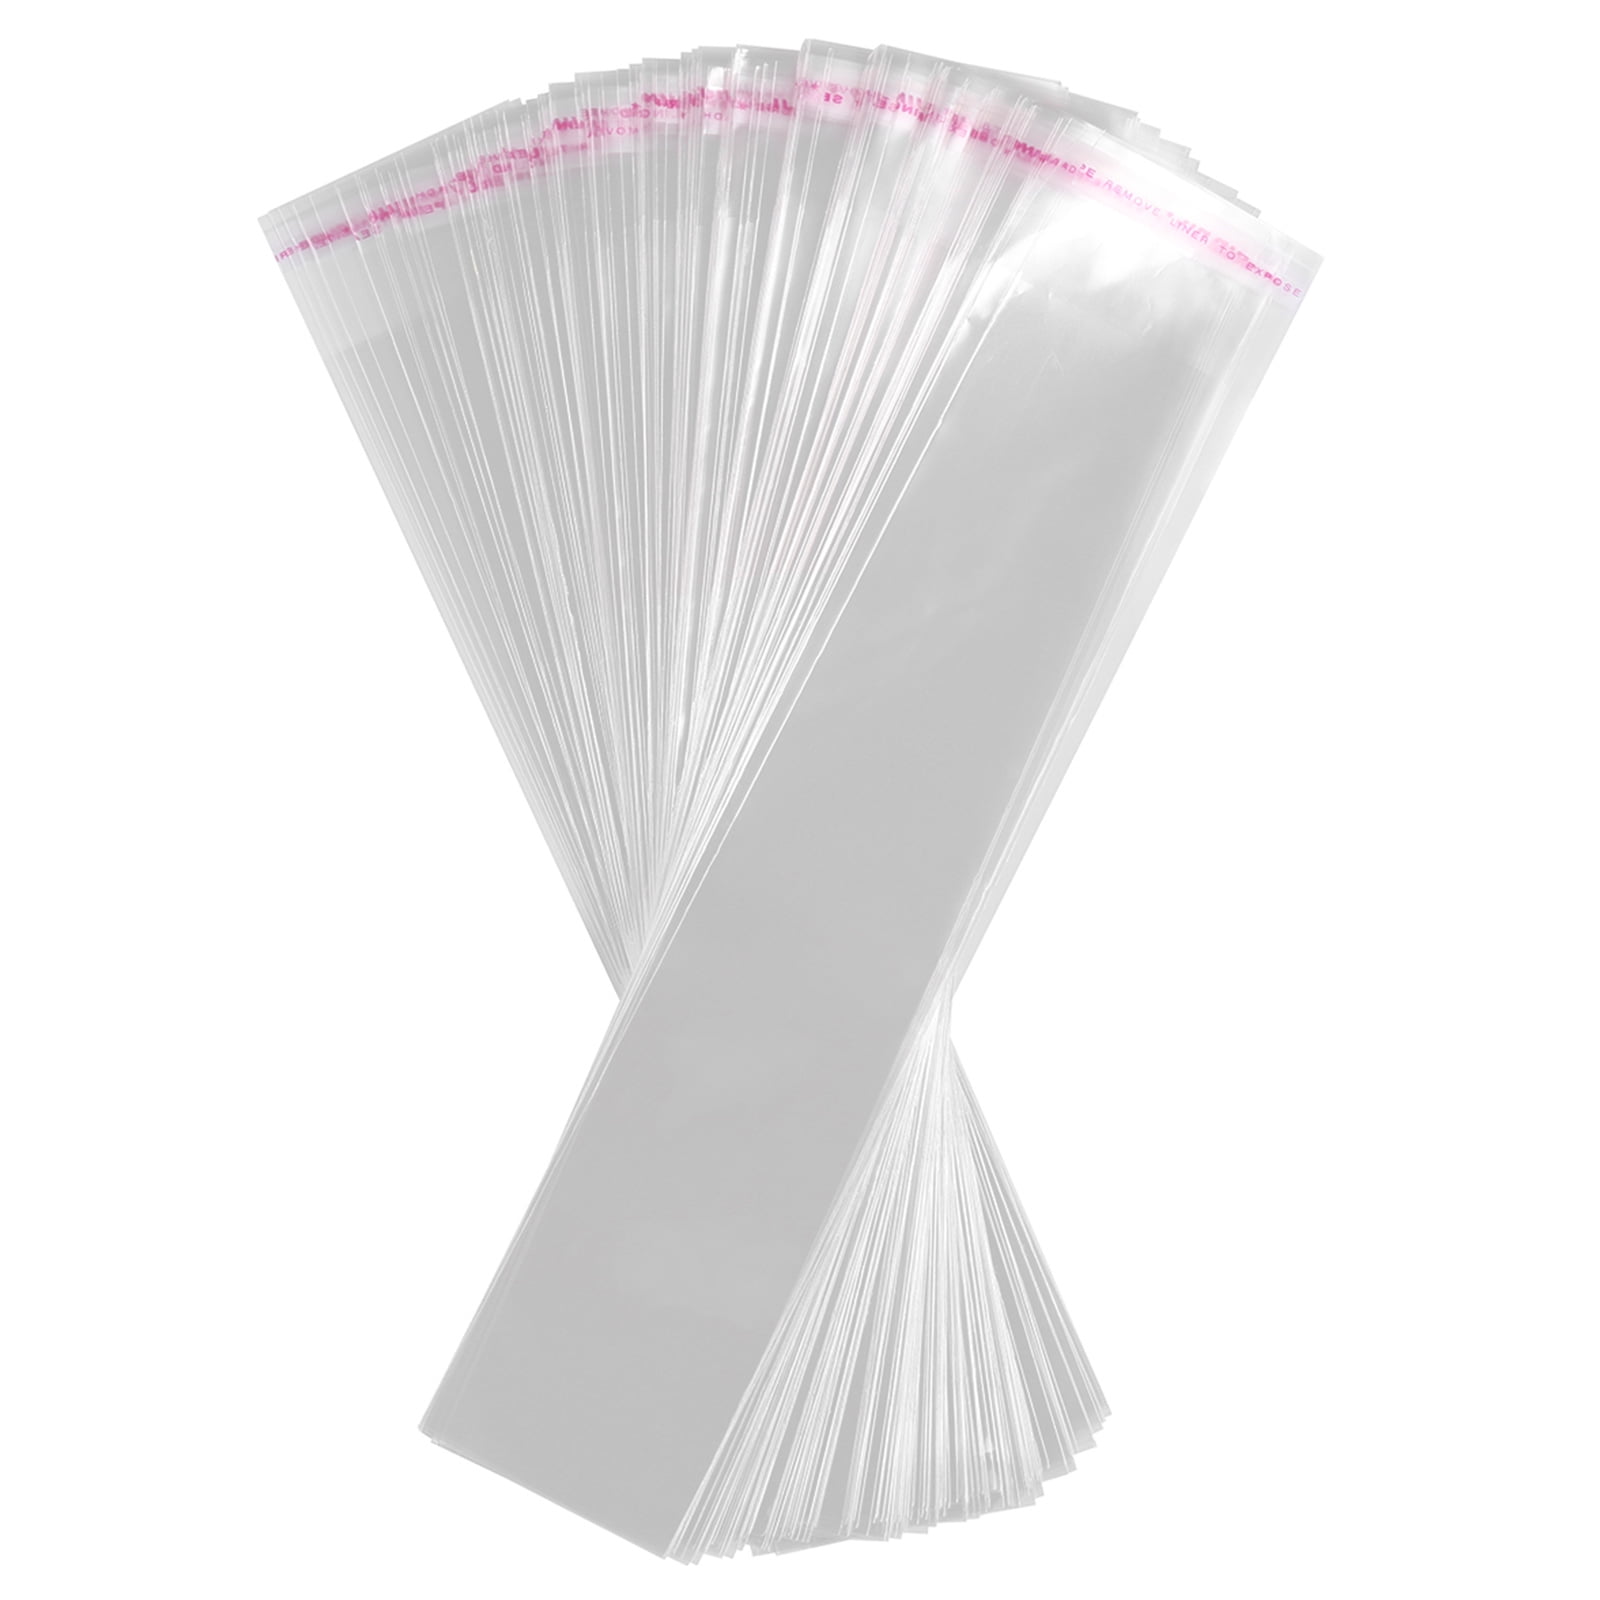 200 Pcs 3x4 Crystal Clear Resealable Recloseable Cellophane/SelfSeal Bags 